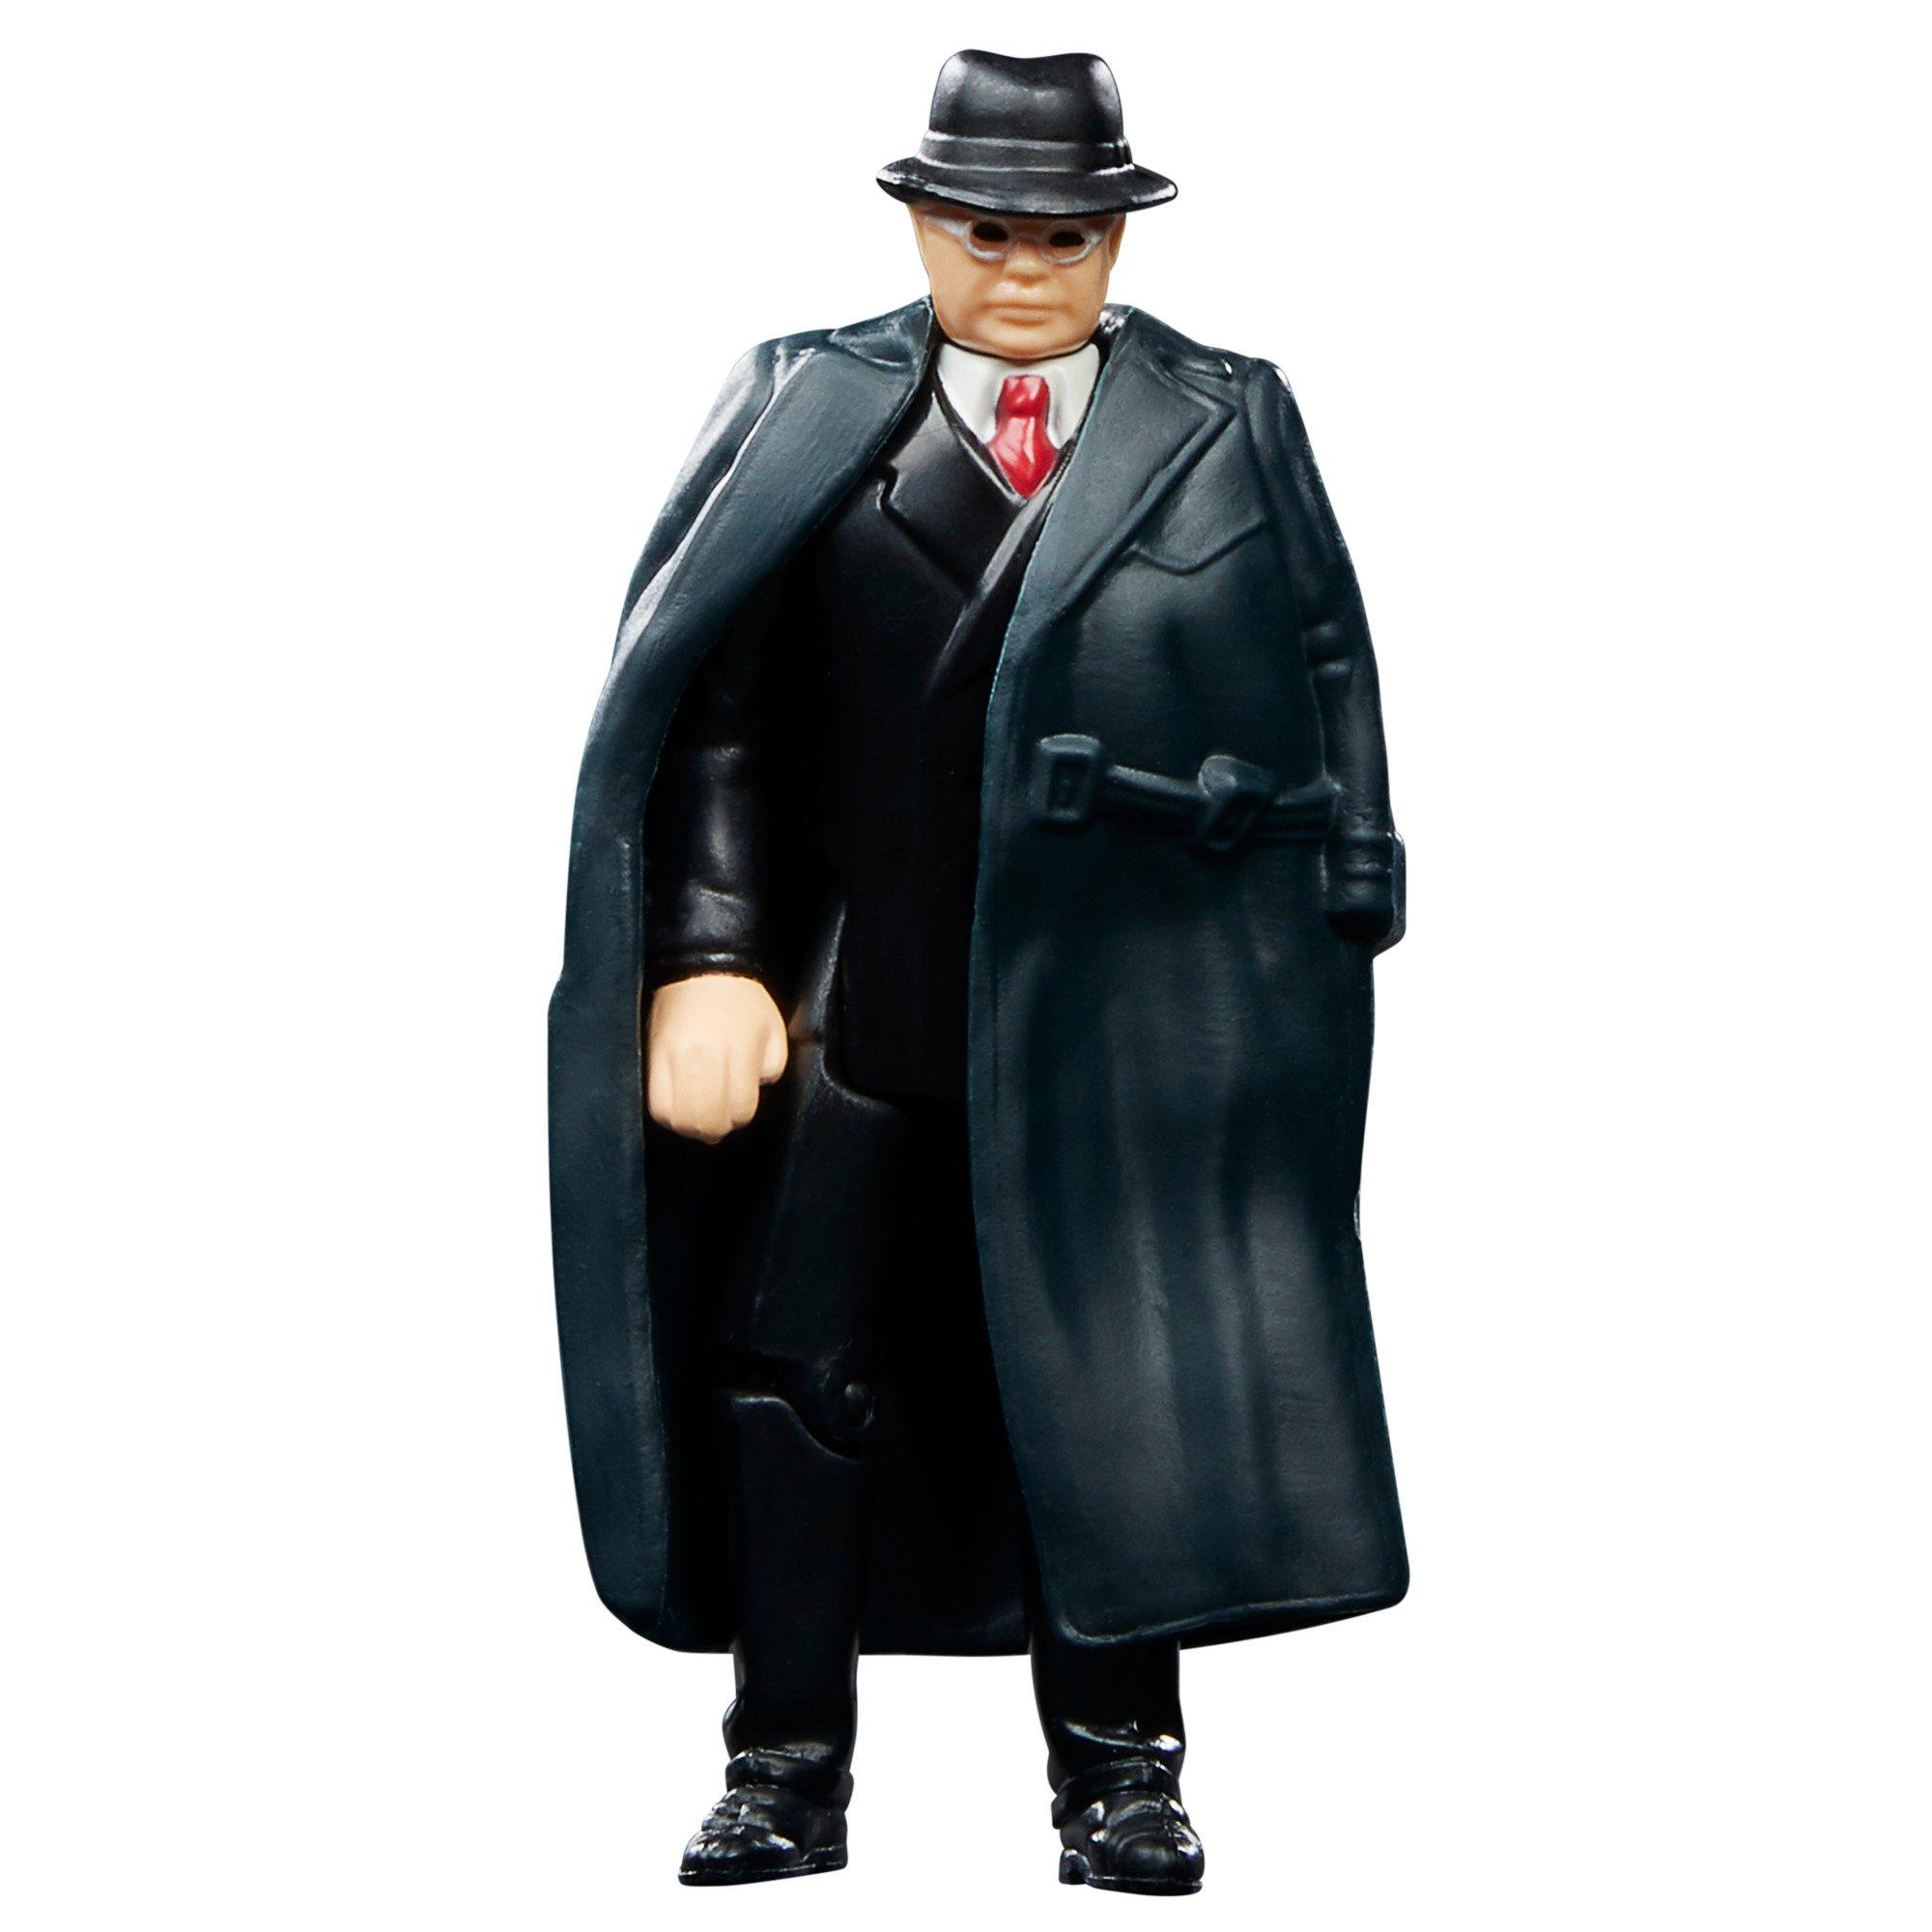 Hasbro Indiana Retro Collection Indiana Jones in Raiders of the Lost Ark Toht 3.75-in Action Figure